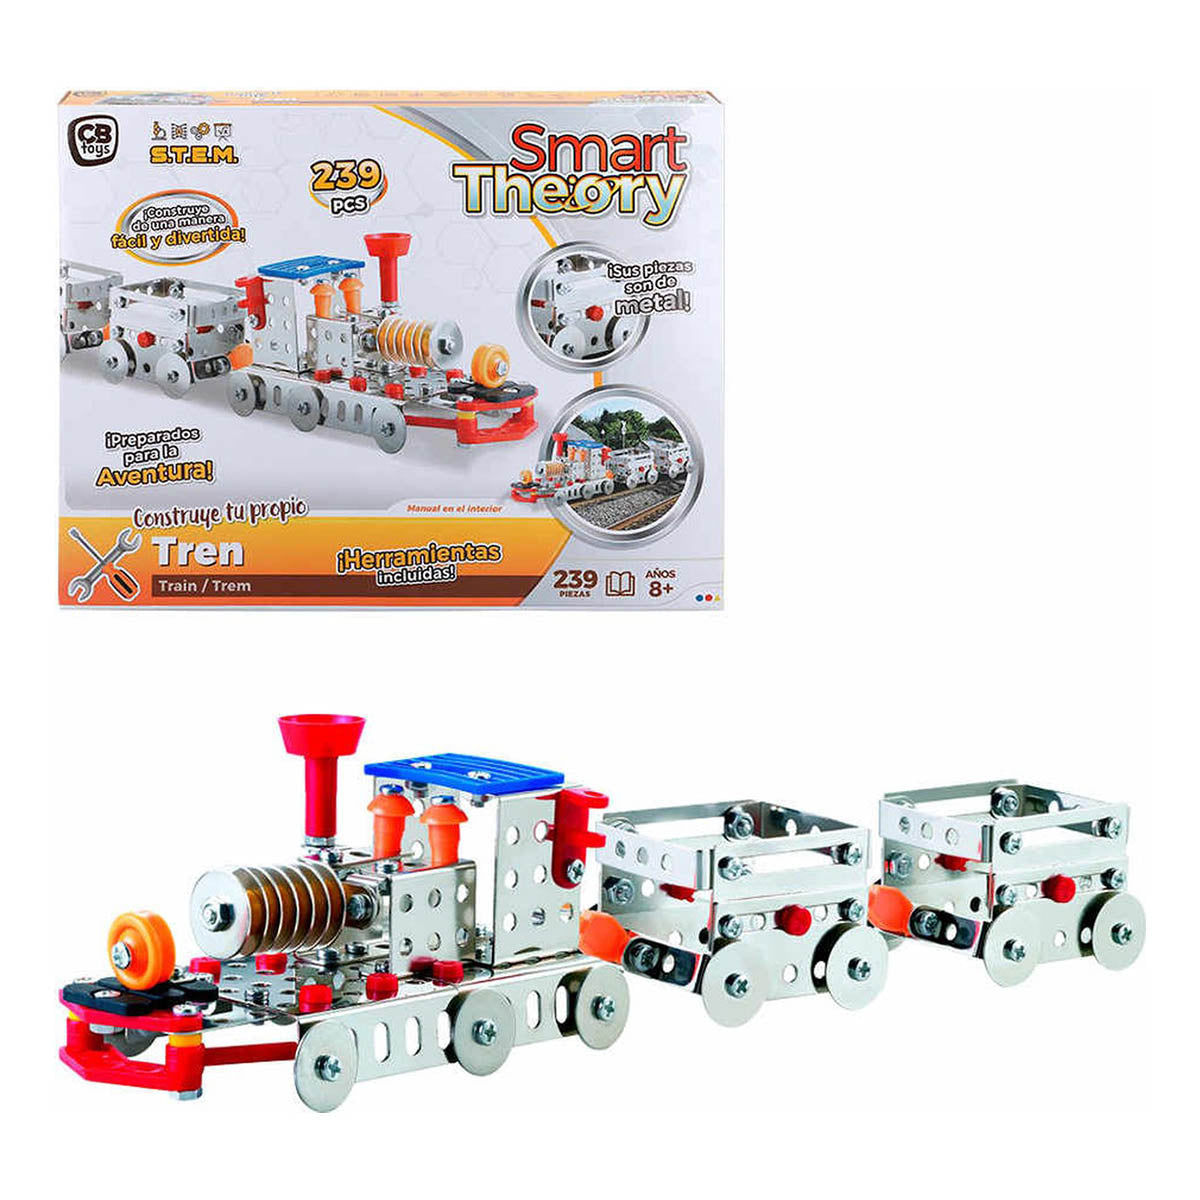 <tc>Ariko</tc> Construction set - Metal Train with Wagons - construction game - construction set train with wagon steel silver 239-piece - Including tools - S.T.E.M. toys - voice toys